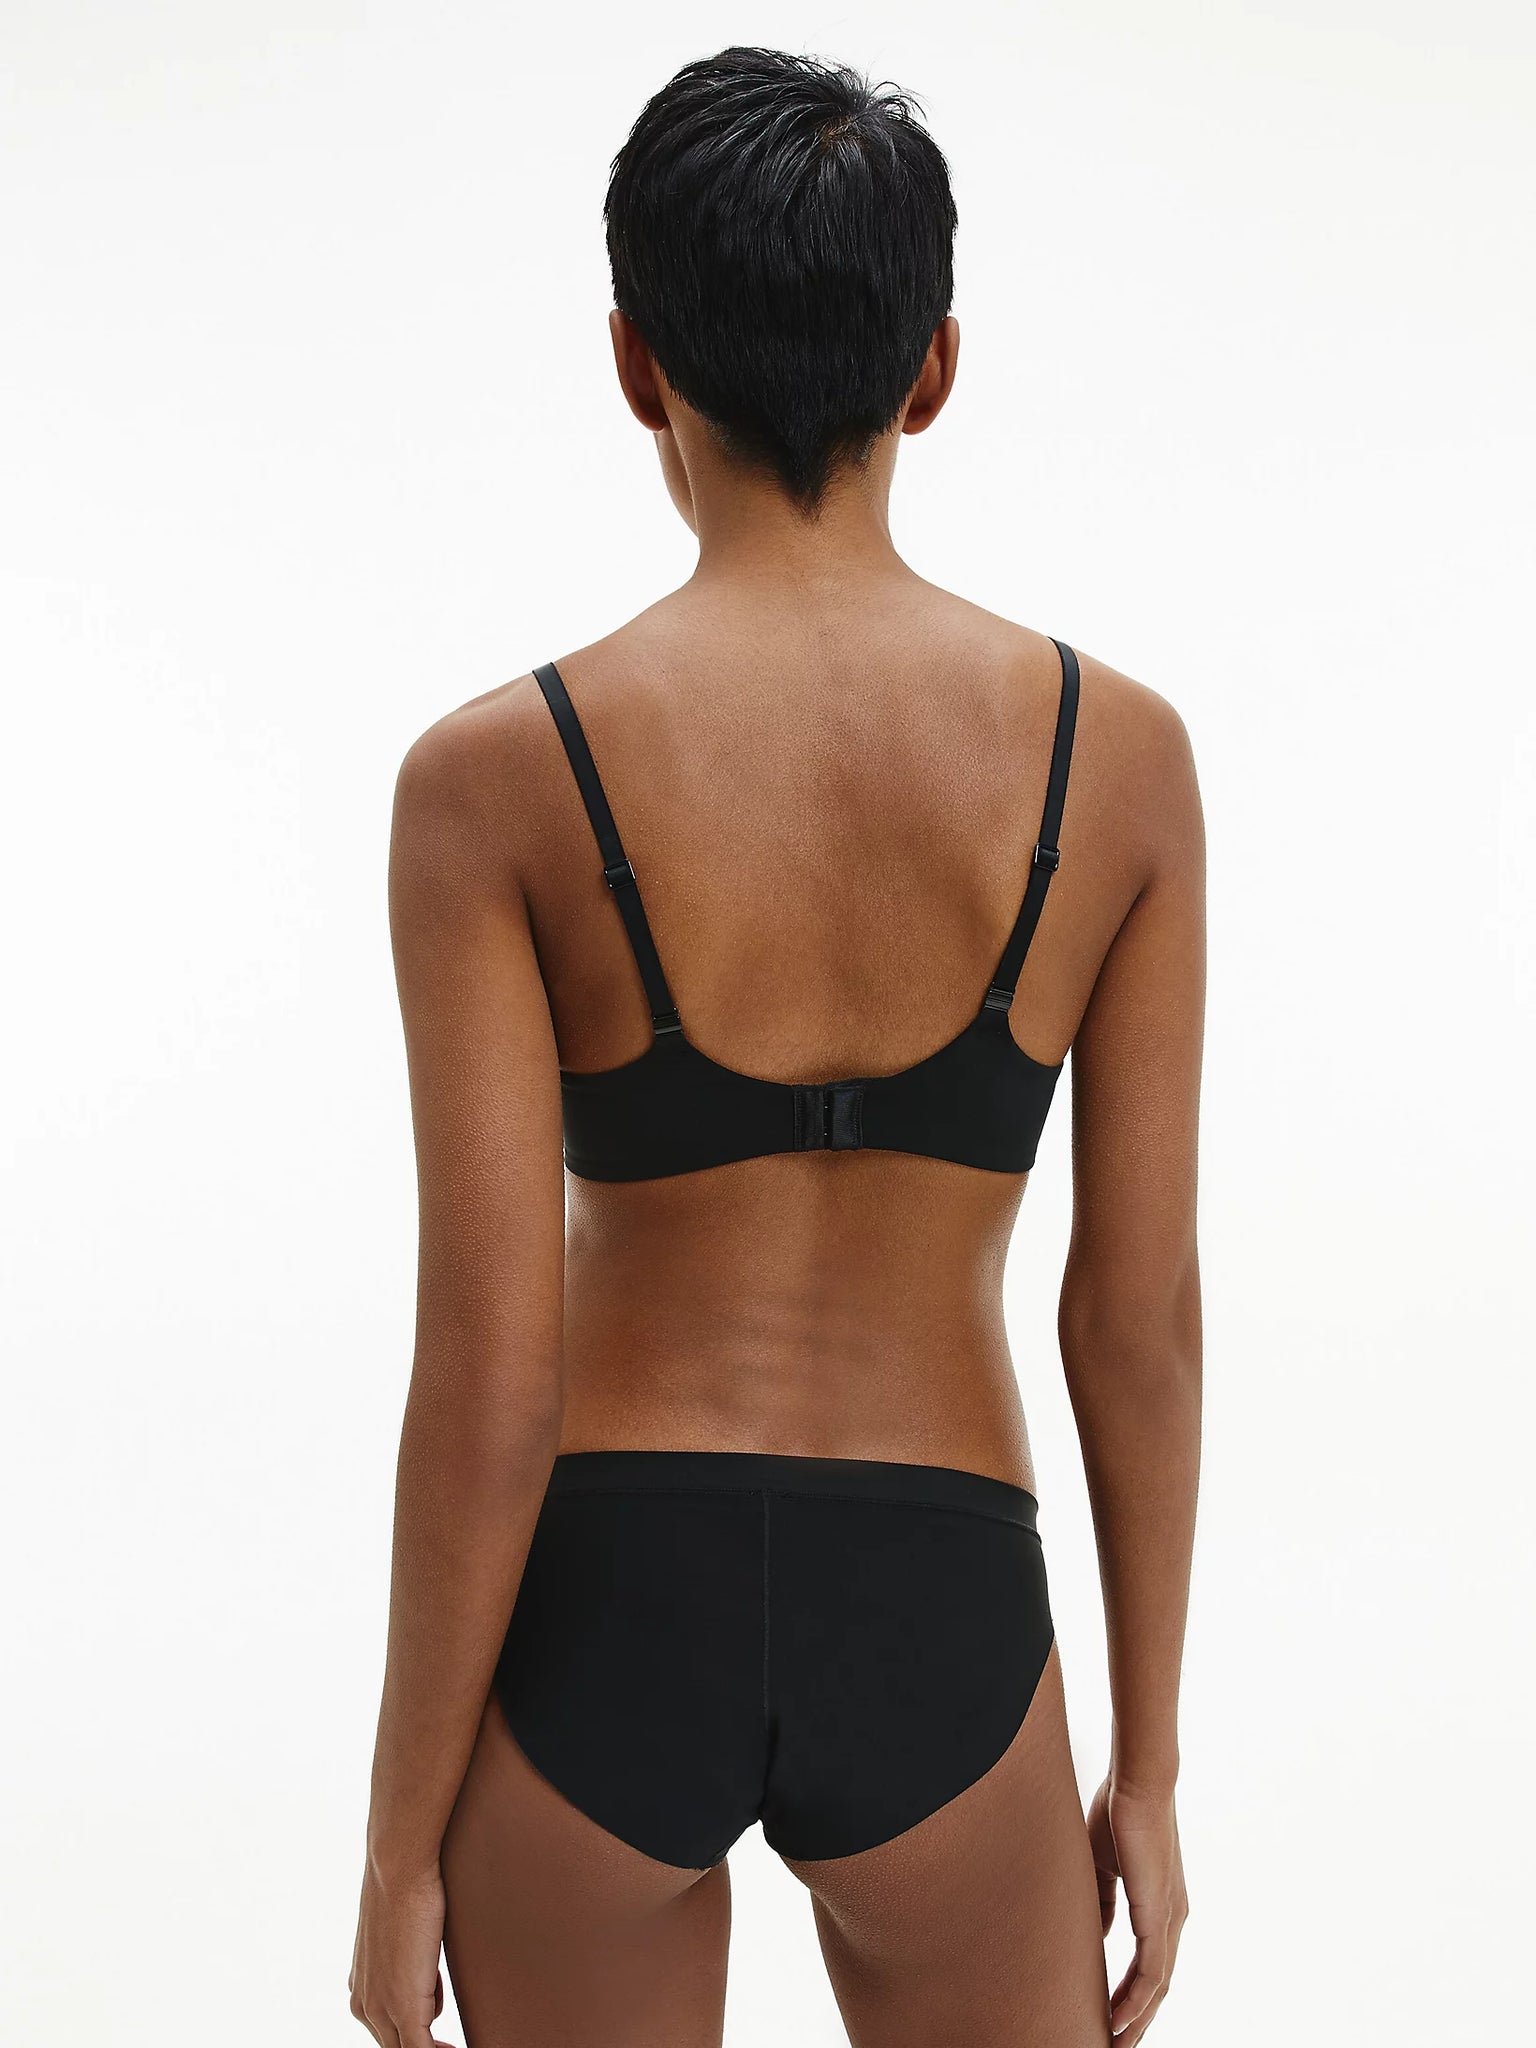 Calvin Klein Padded underwire Bra Black Size 34 A - $12 (75% Off Retail) -  From Lea